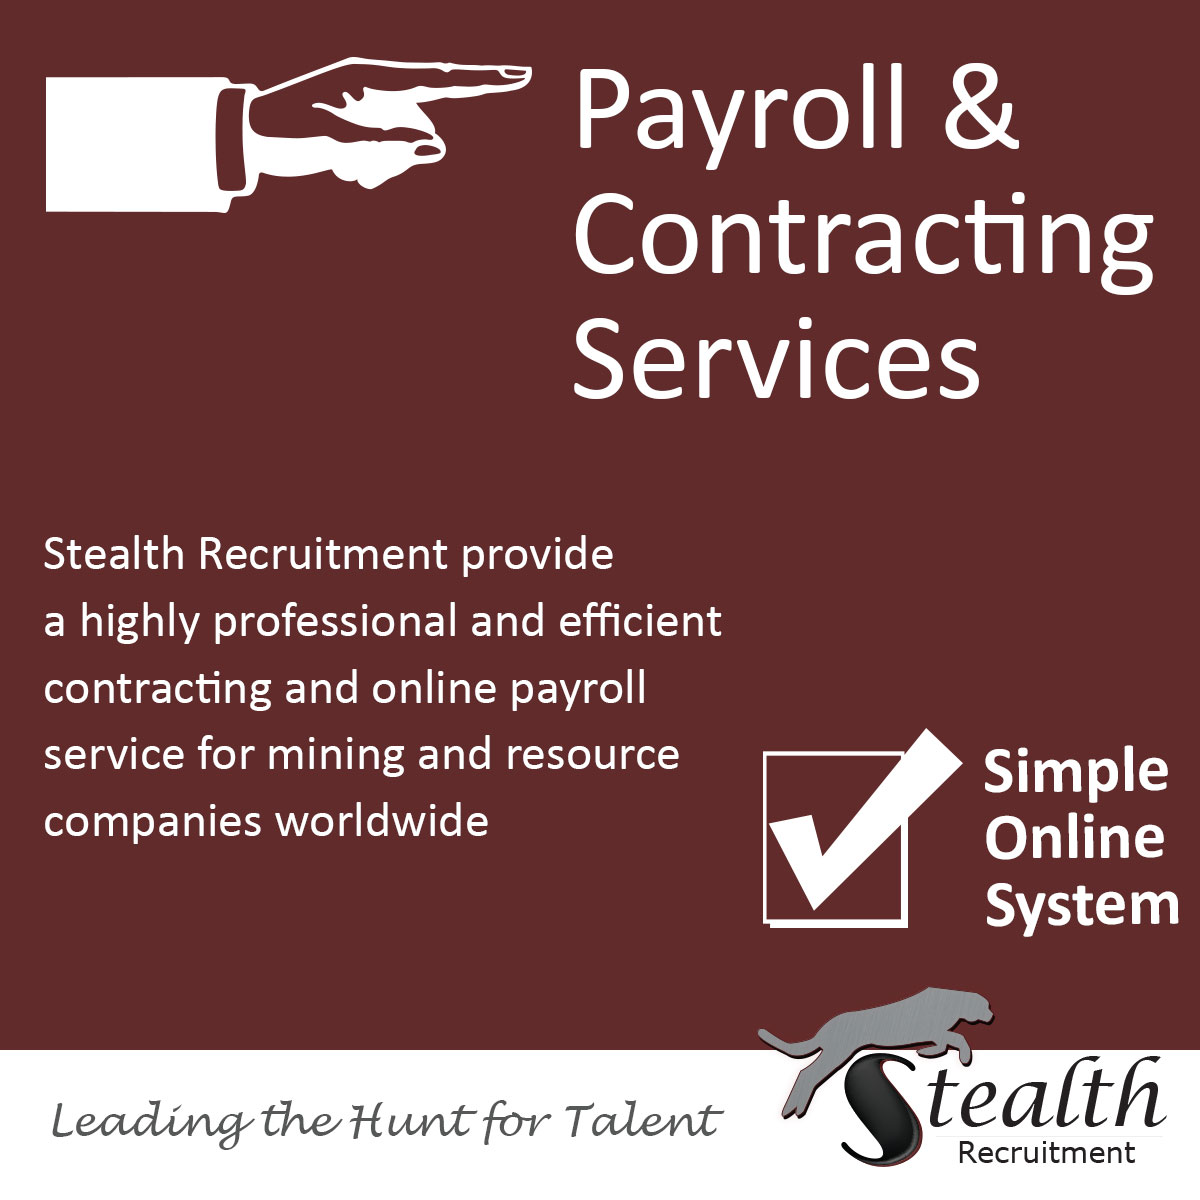 Contracting and Payroll Services